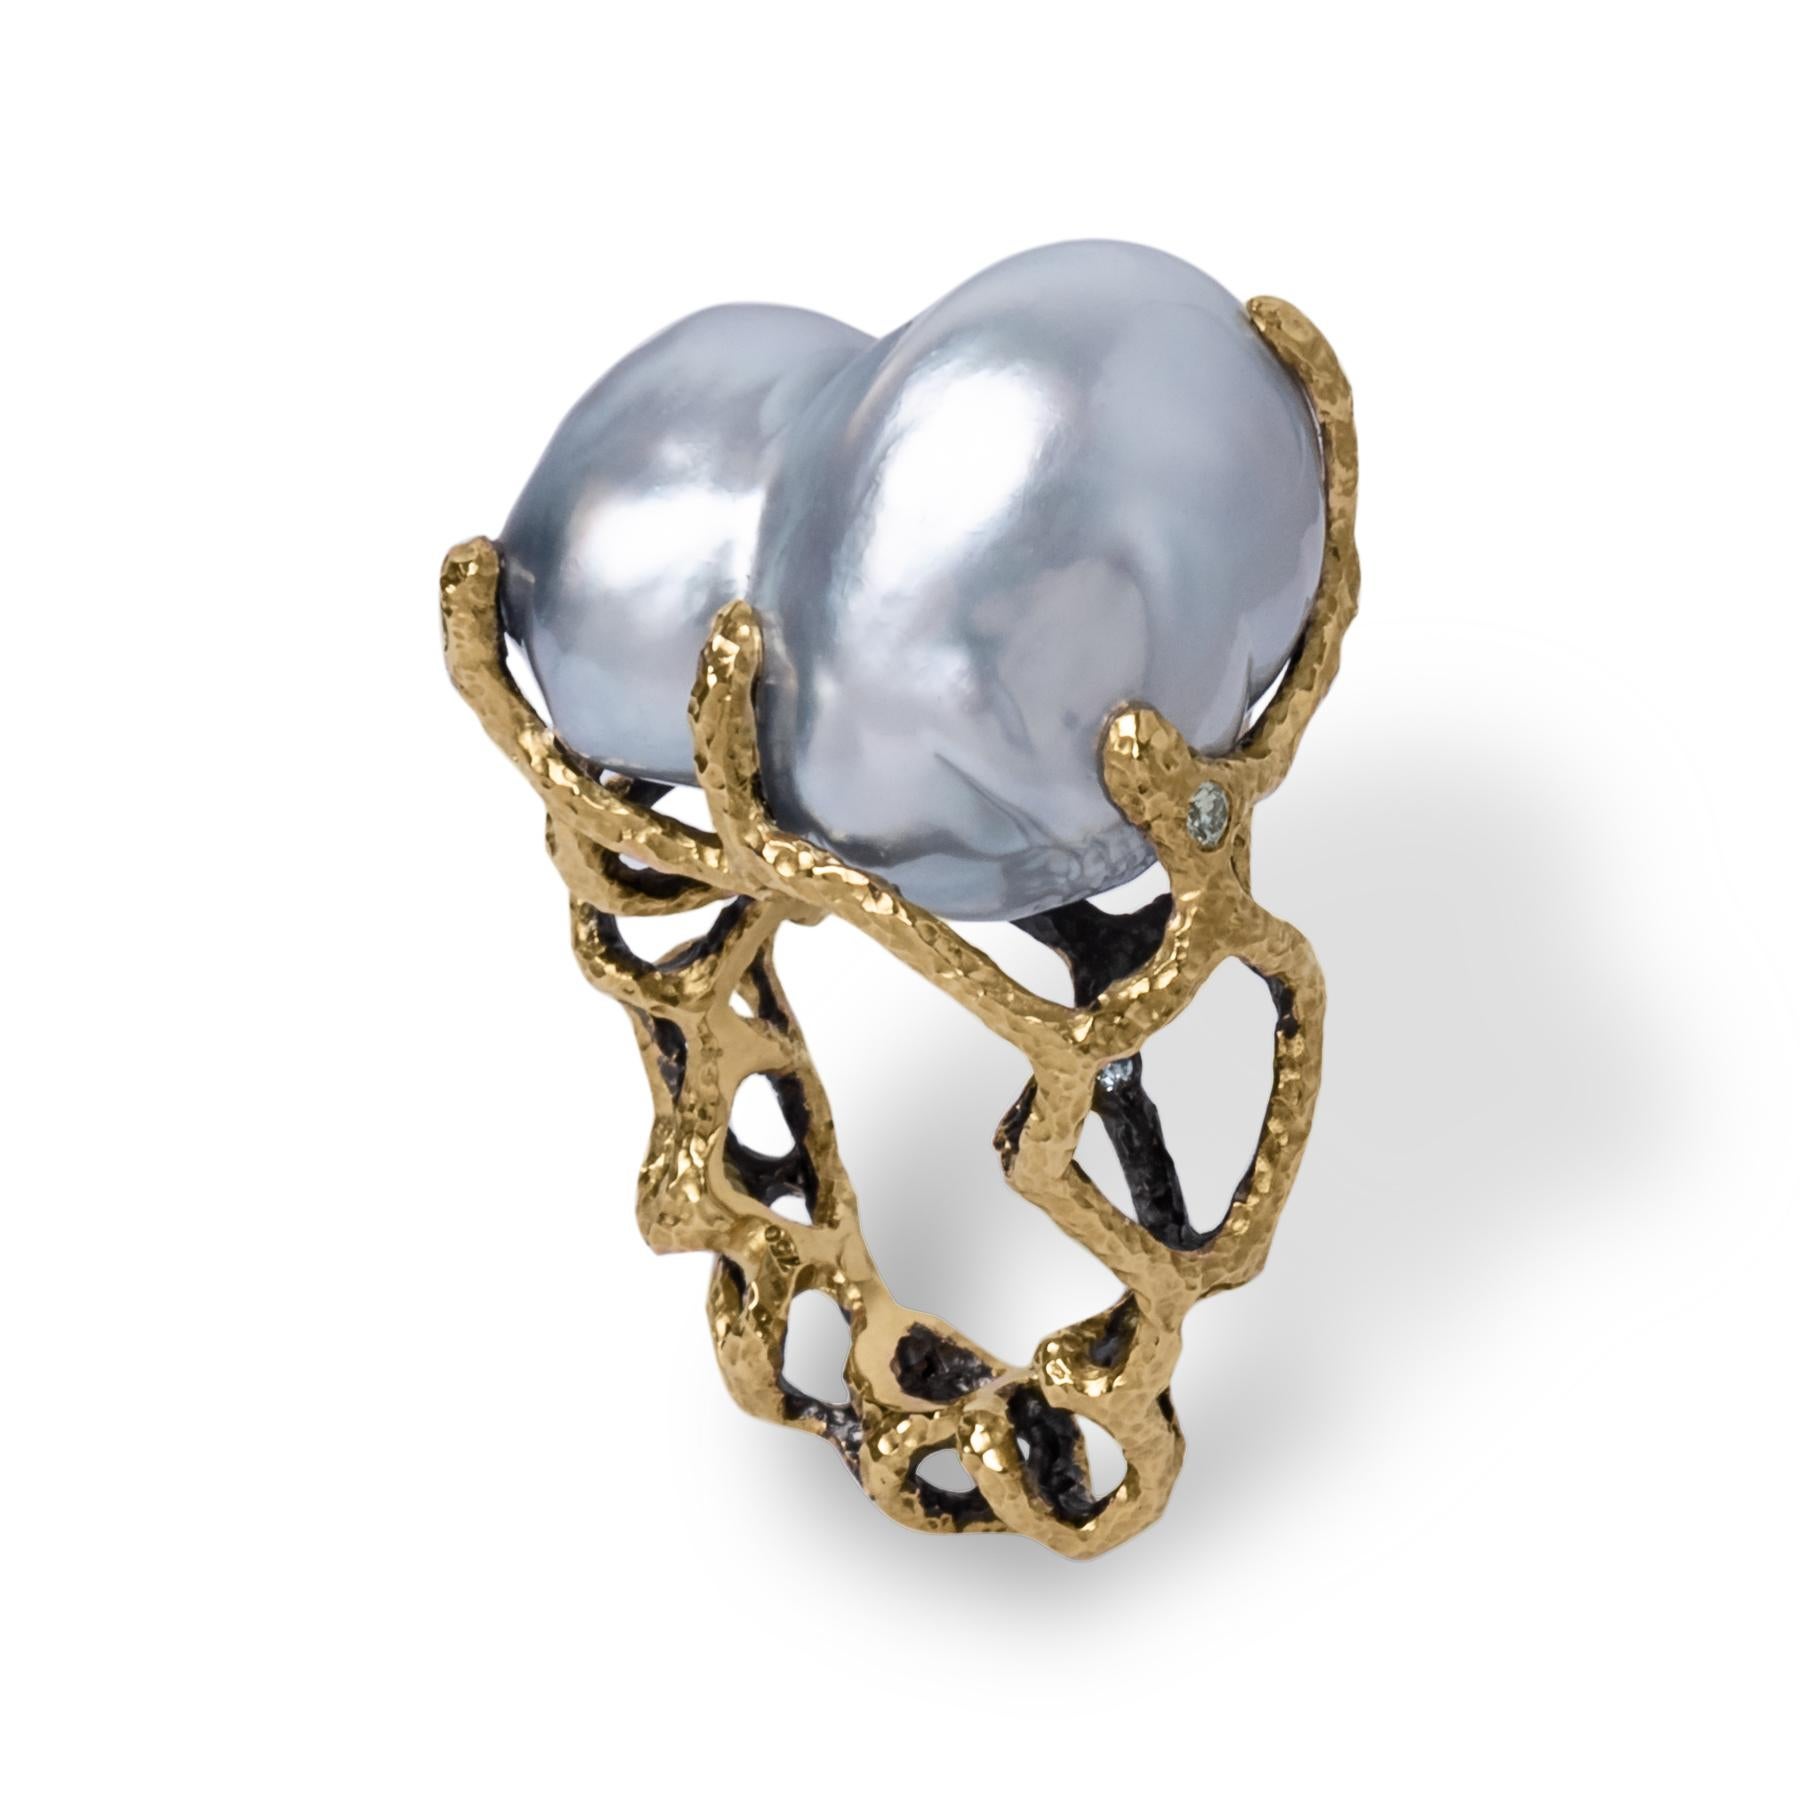 This one of a kind ring is from Lingjun's 'FISSURE' collection, featuring white Australian South Sea Baroque pearl. 

The unique organic lines of gold were custom carved to match the pearls' natural shape, allowing its audience to appreciate the